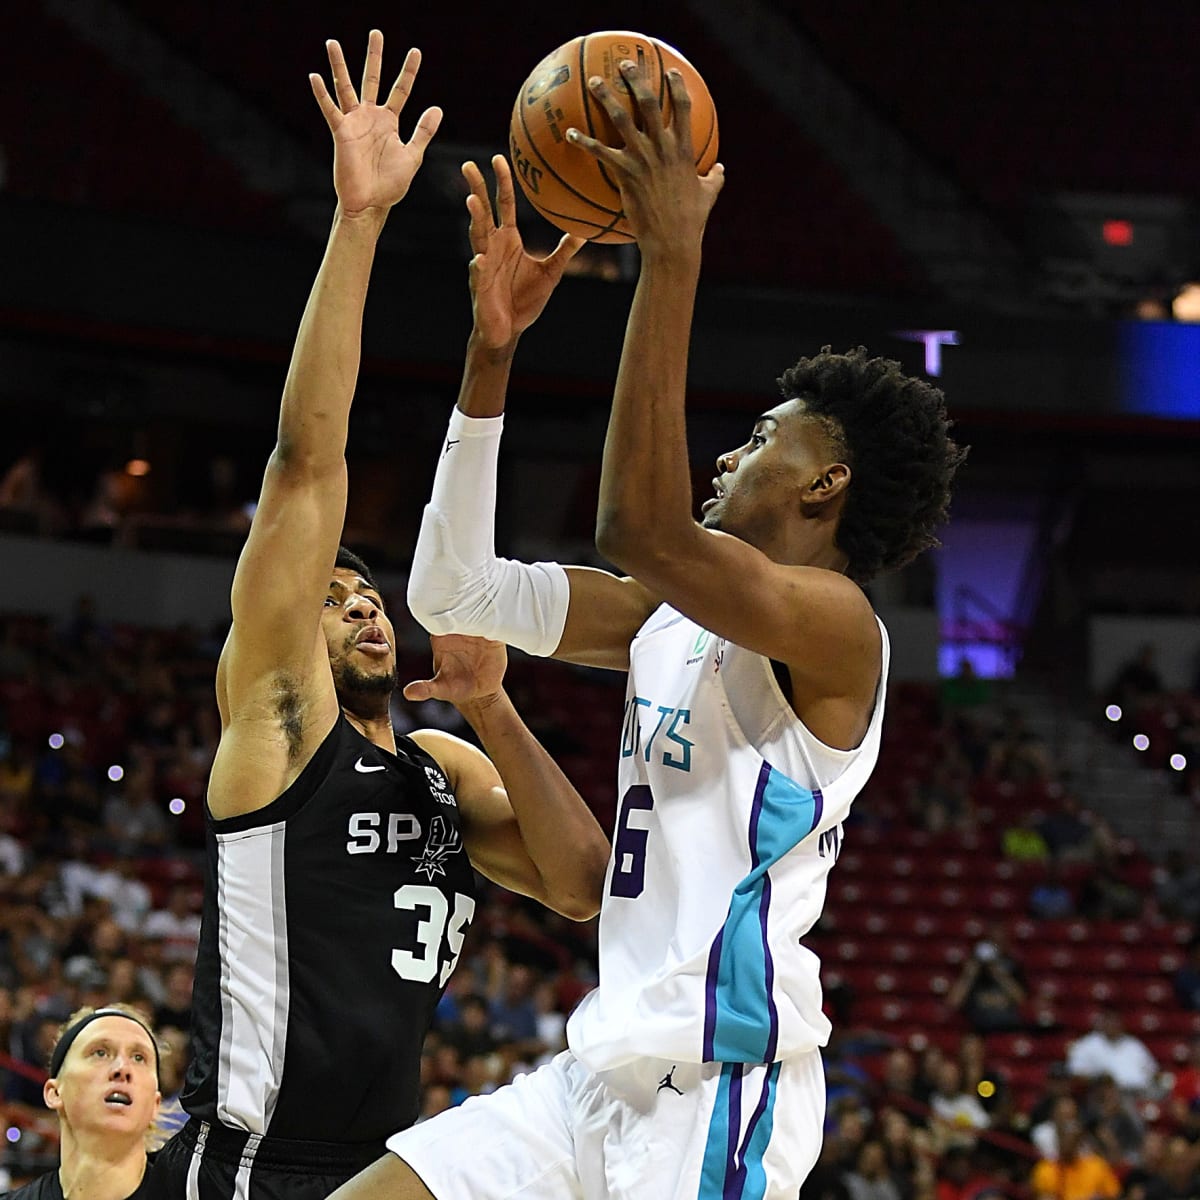 WELCOME TO #BUZZCITY, JALEN MCDANIELS! - Charlotte Hornets